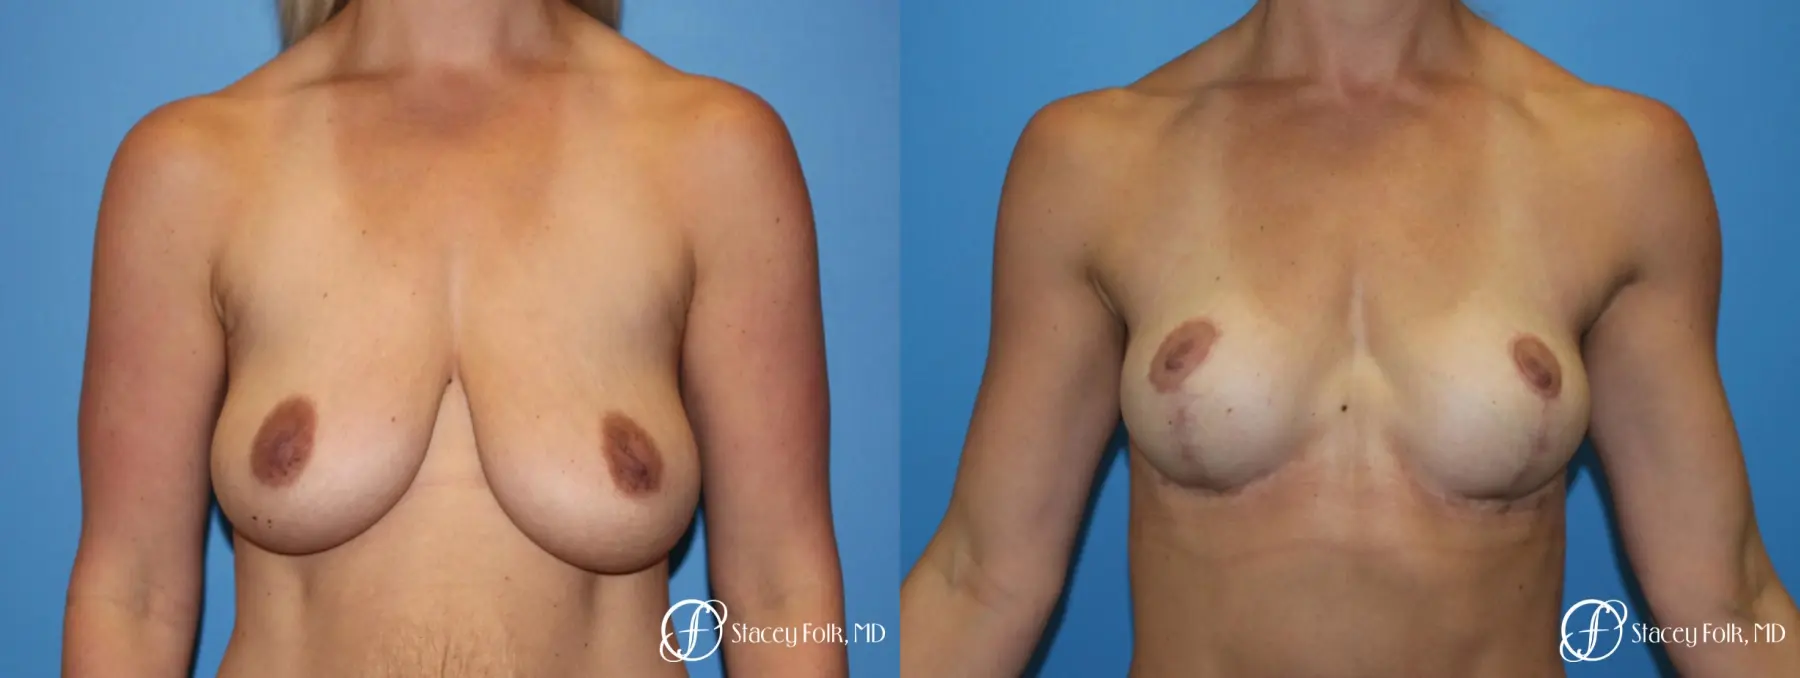 Denver Breast Lift - Mastopexy 8297 - Before and After 1